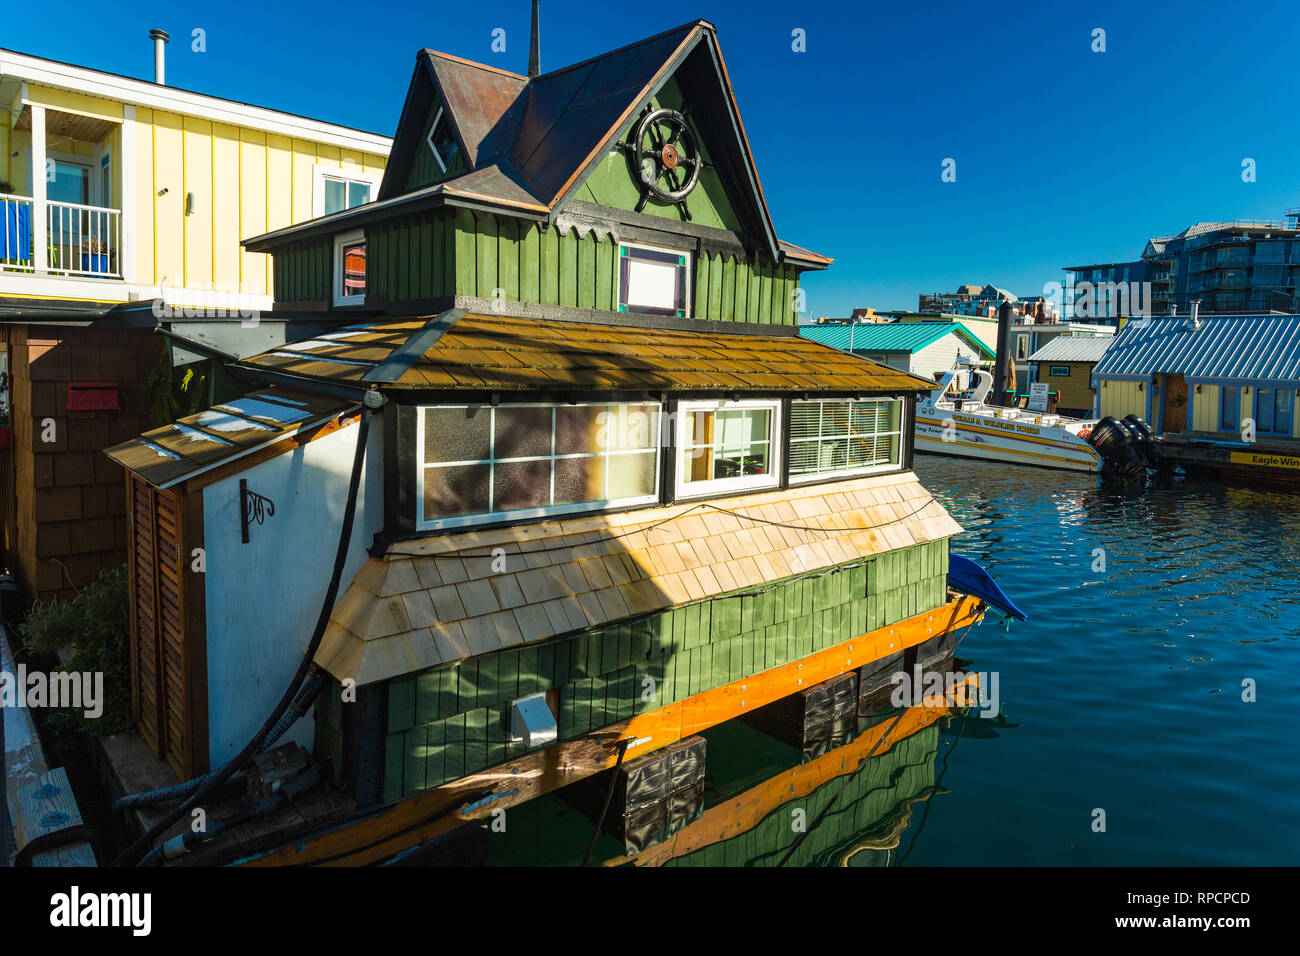 VICTORIA BC CANADA FEB 12, 2019: Victoria Inner Harbour, Fisherman Wharf is a hidden treasure area. With colorful floating homes, gifts, food and wild Stock Photo